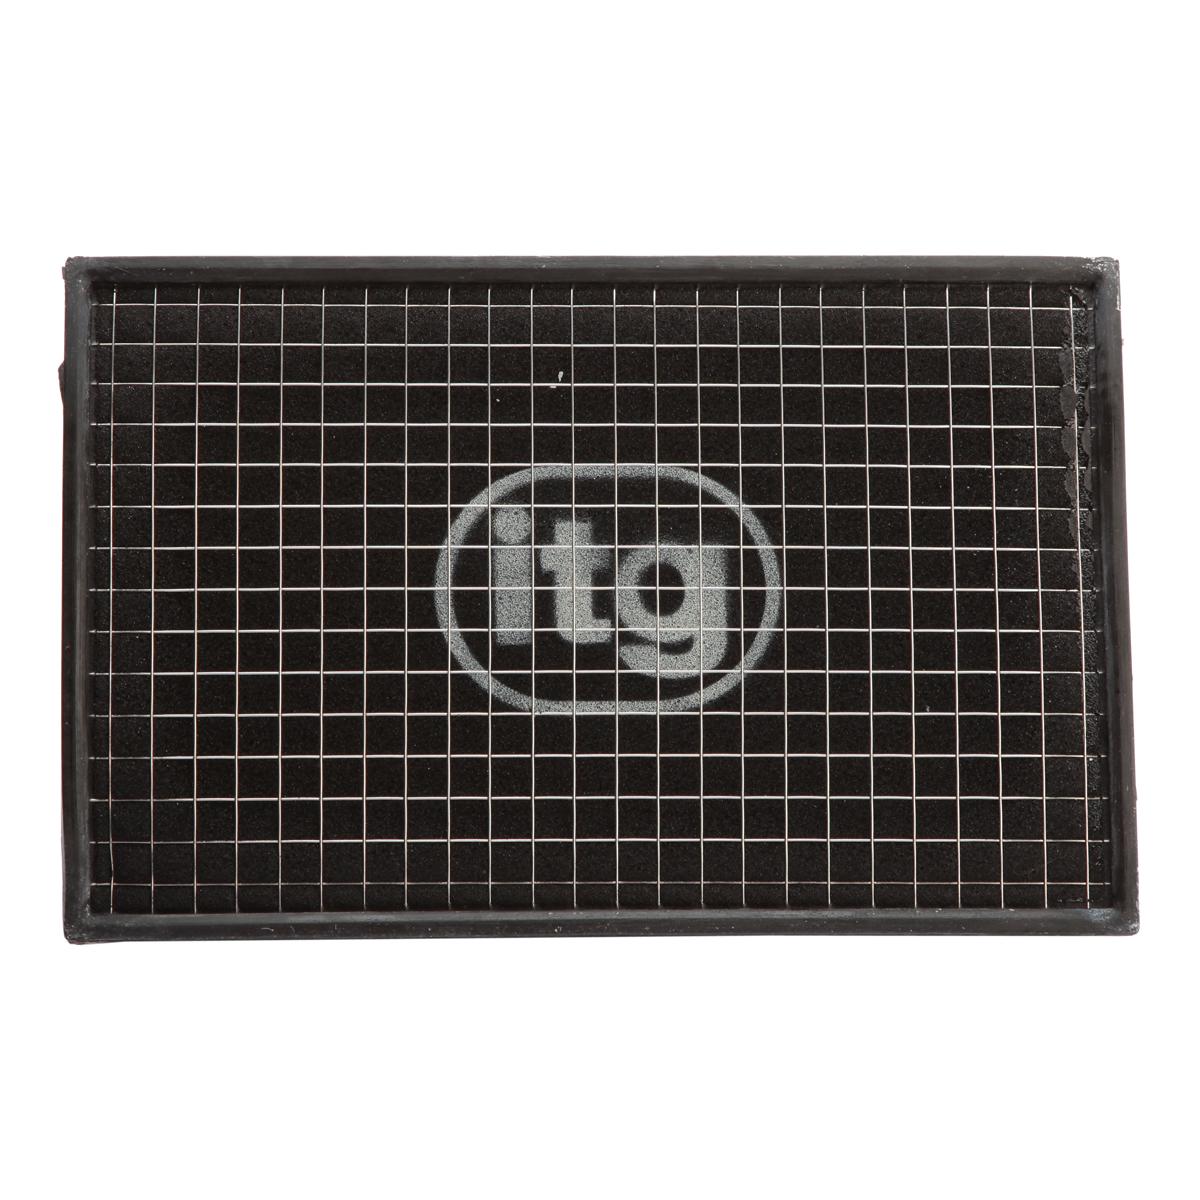 ITG Air Filter For VW Cc 3.6 Fsi (02/12>)